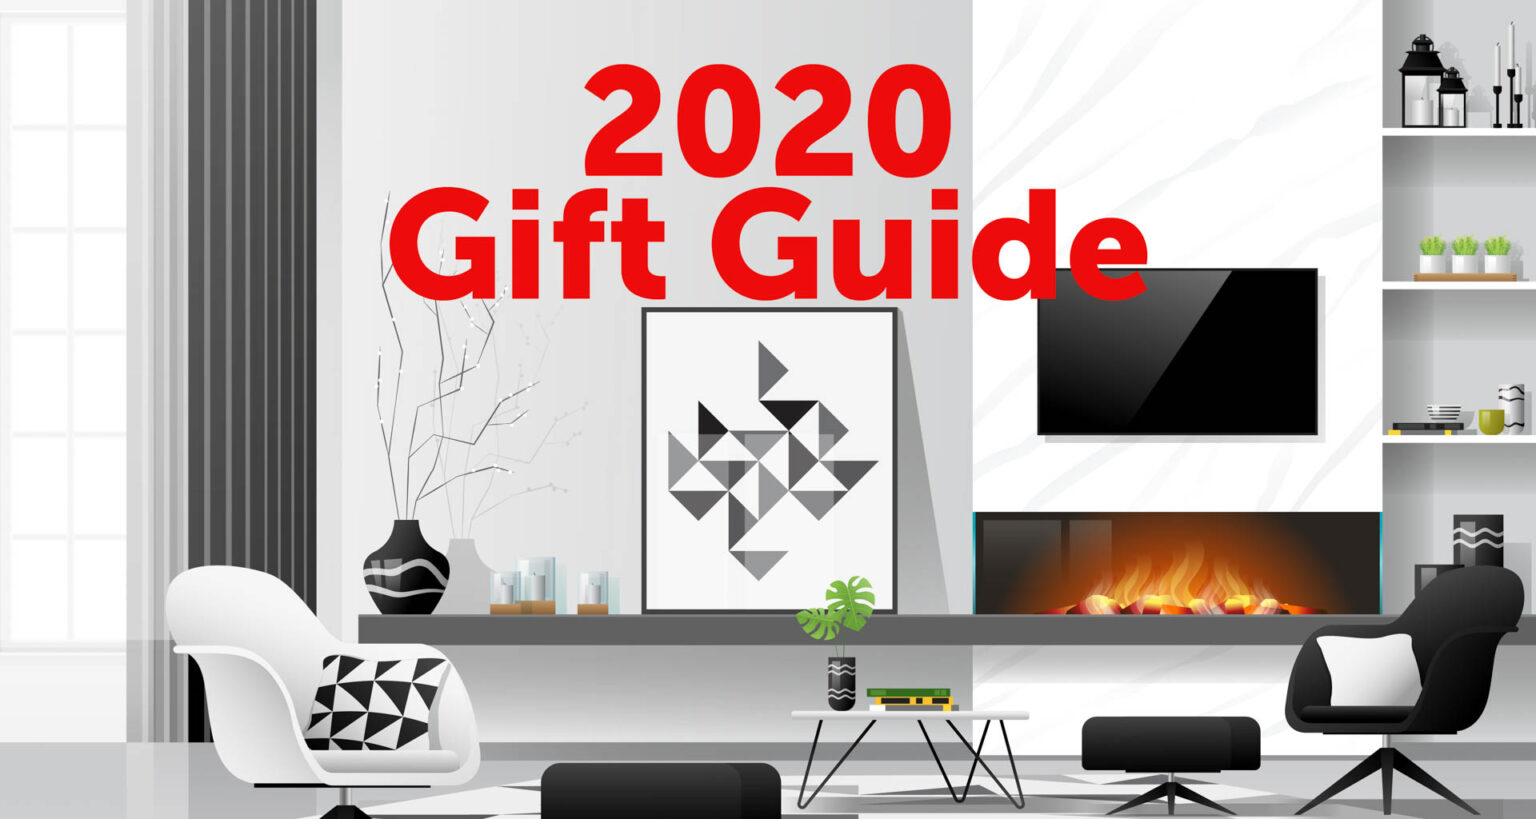 Our 2020 Holiday Gift Guide is here.